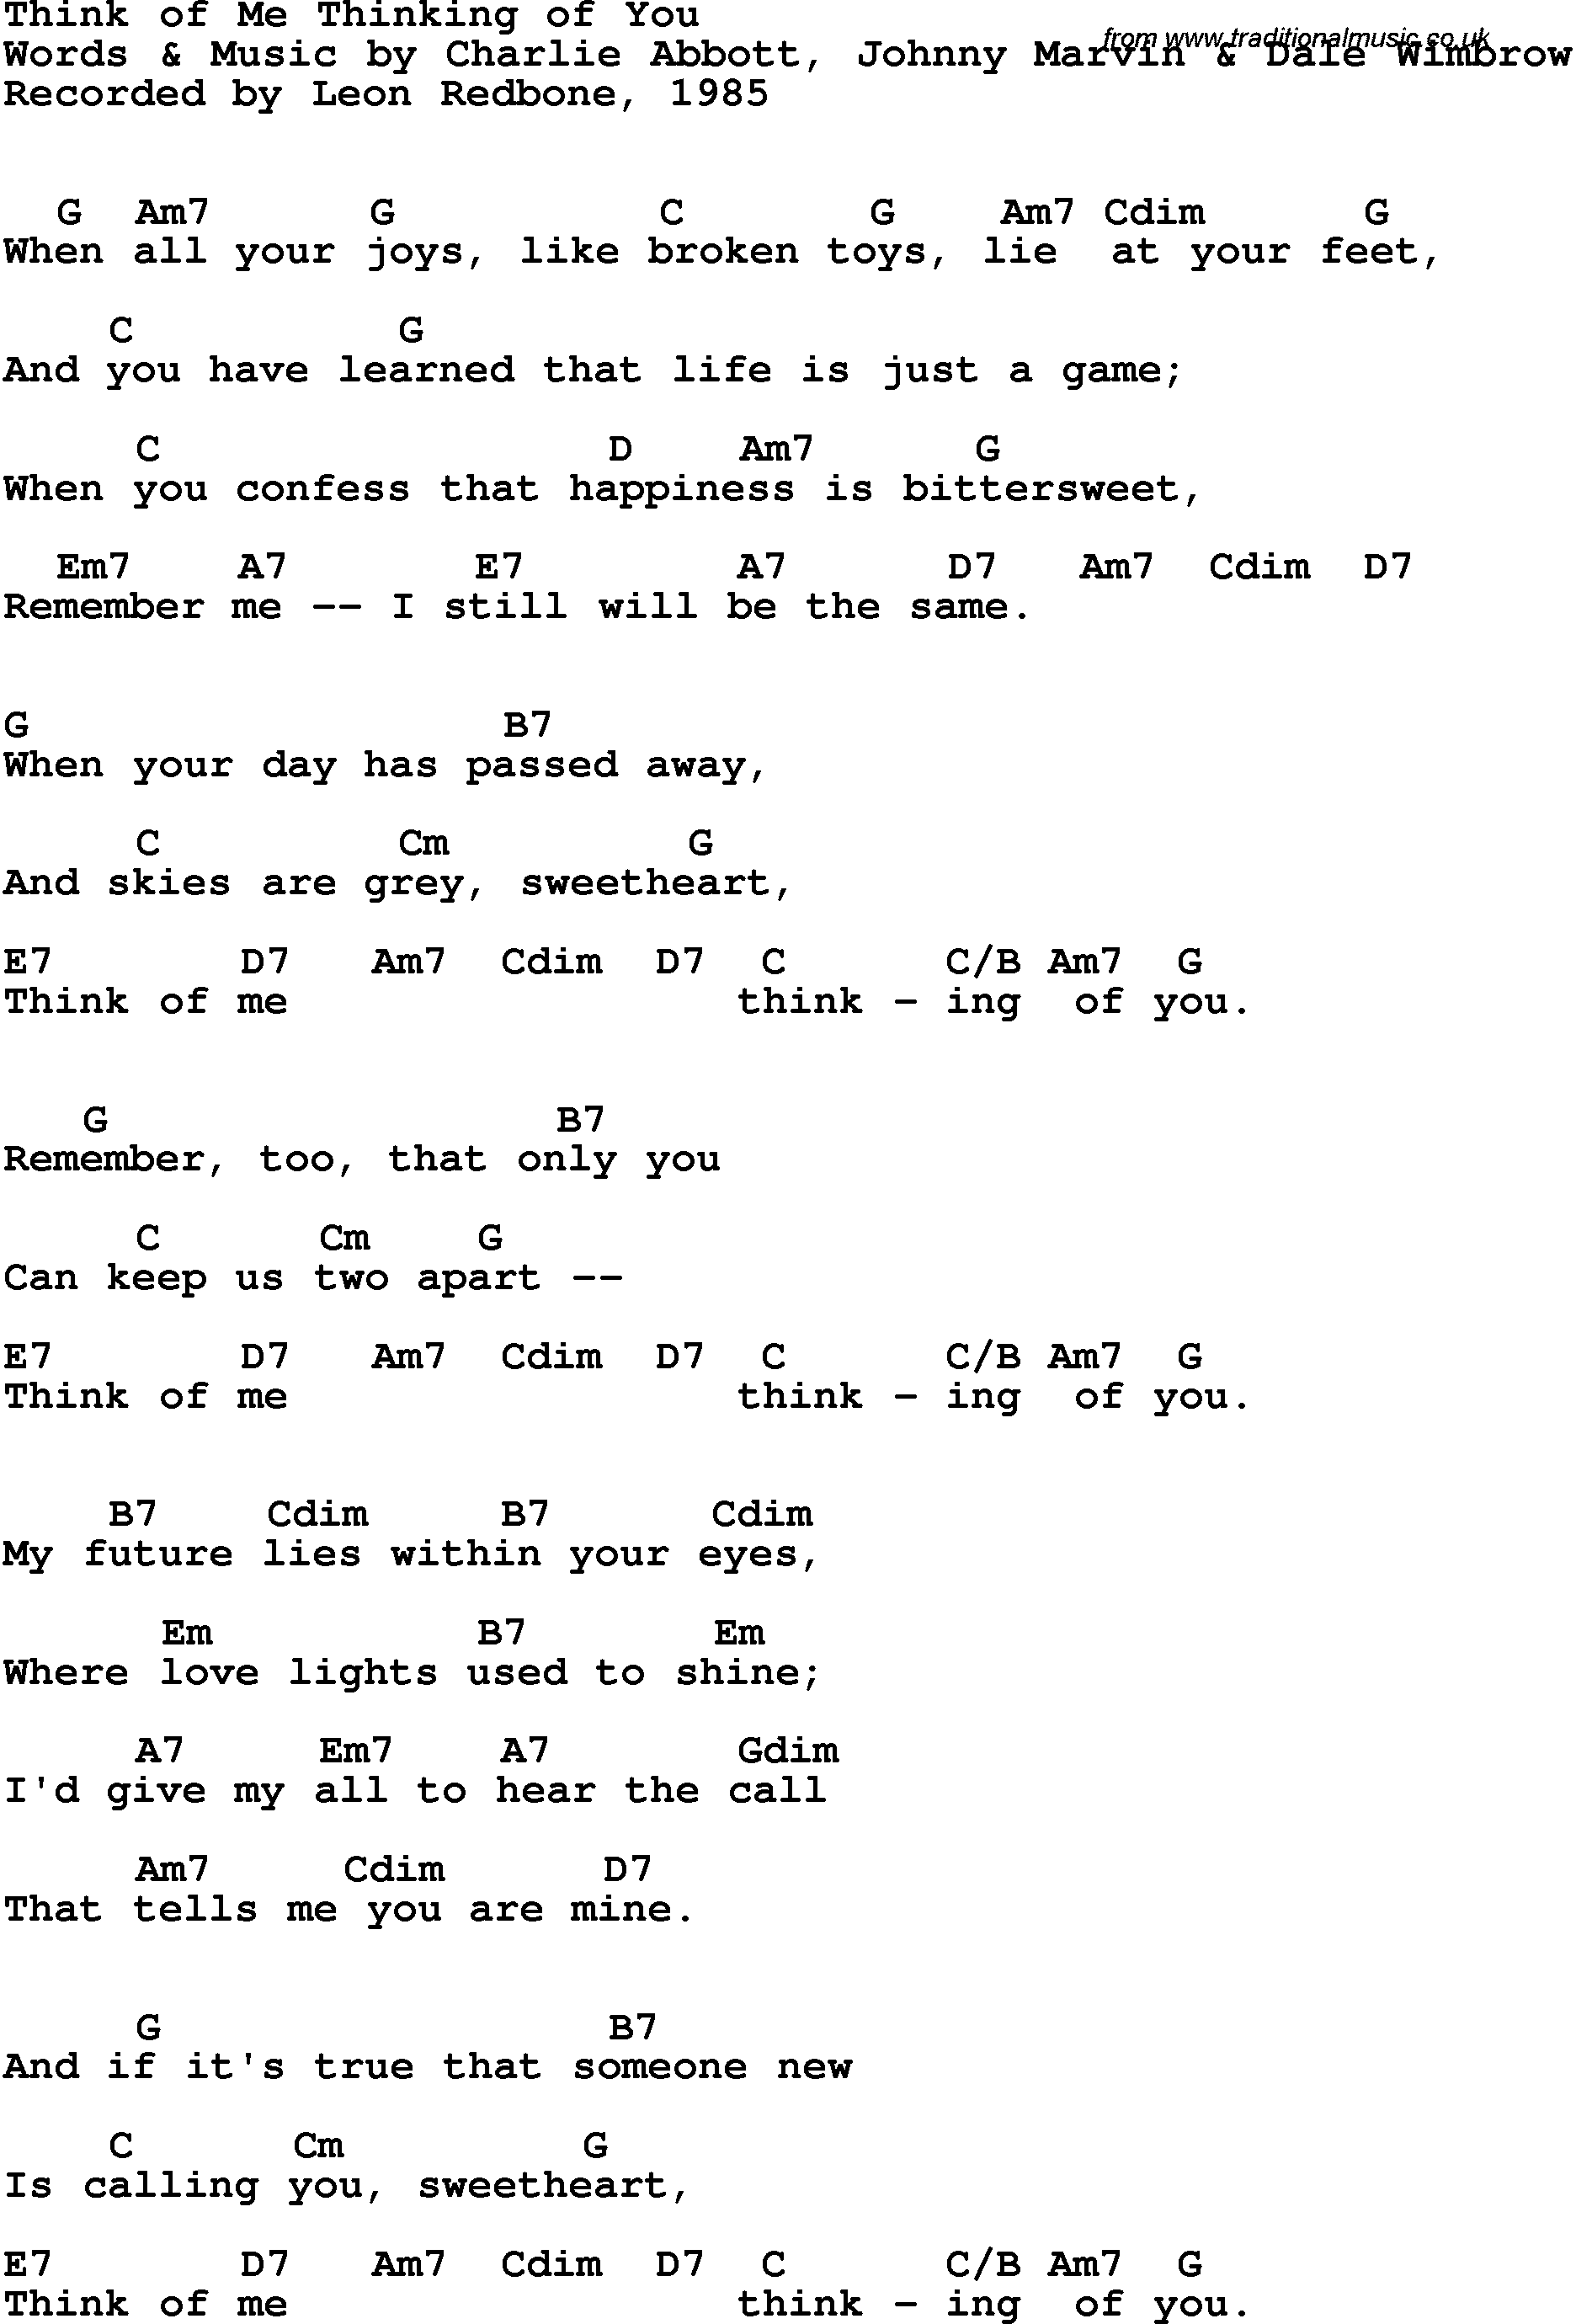 Song Lyrics with guitar chords for Think Of Me Thinking Of You - Leon Redbone, 1985